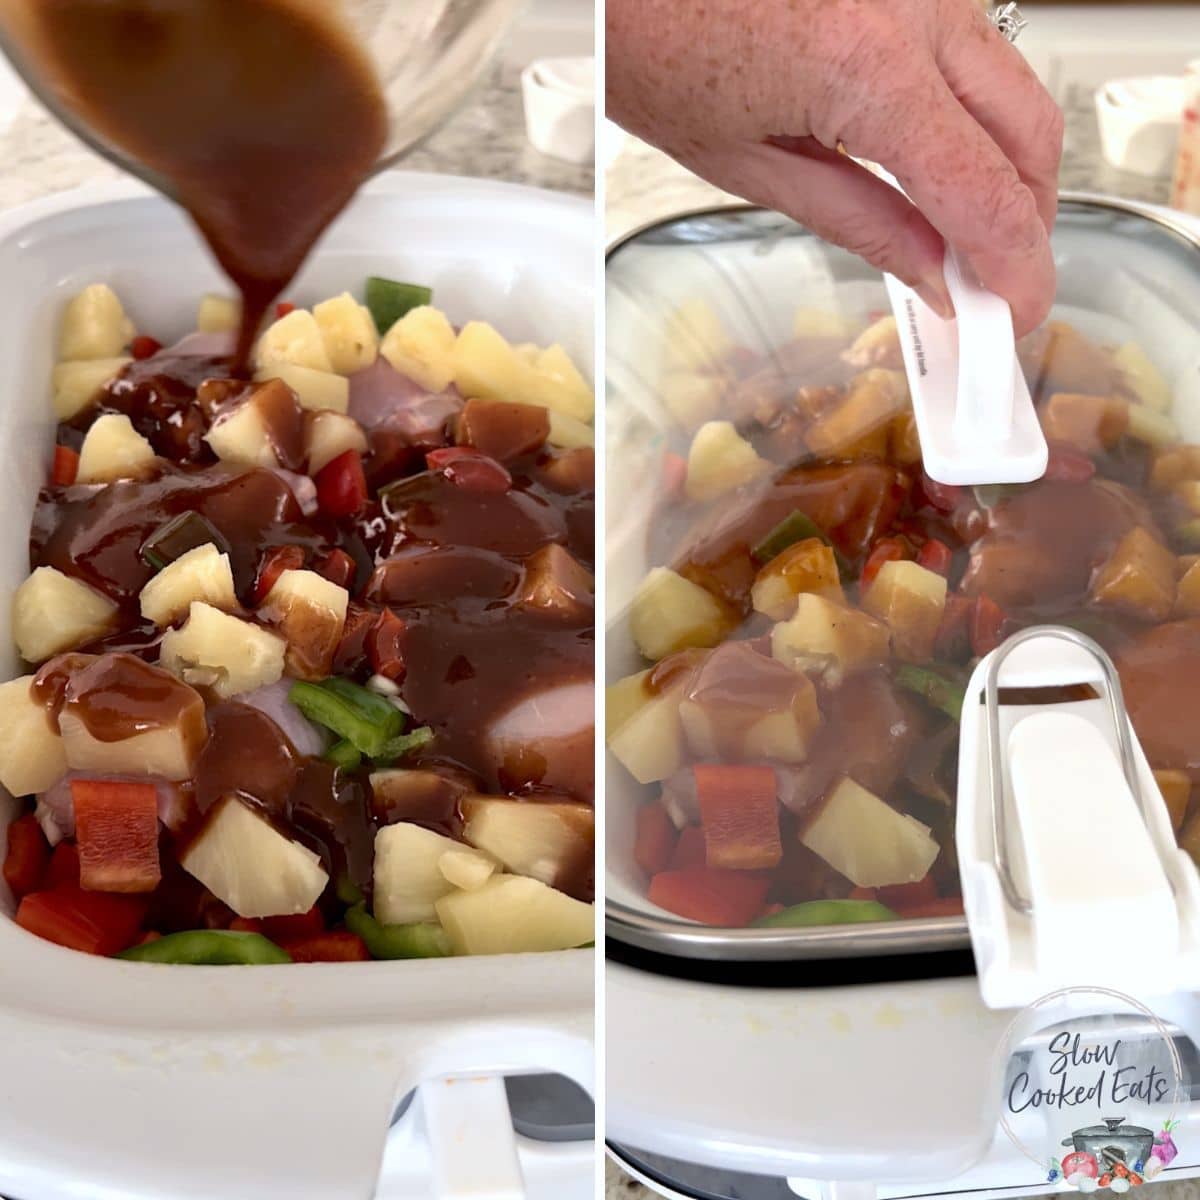 Pouring the sweet and tangy sauce over the crockpot Hawaiian chicken.